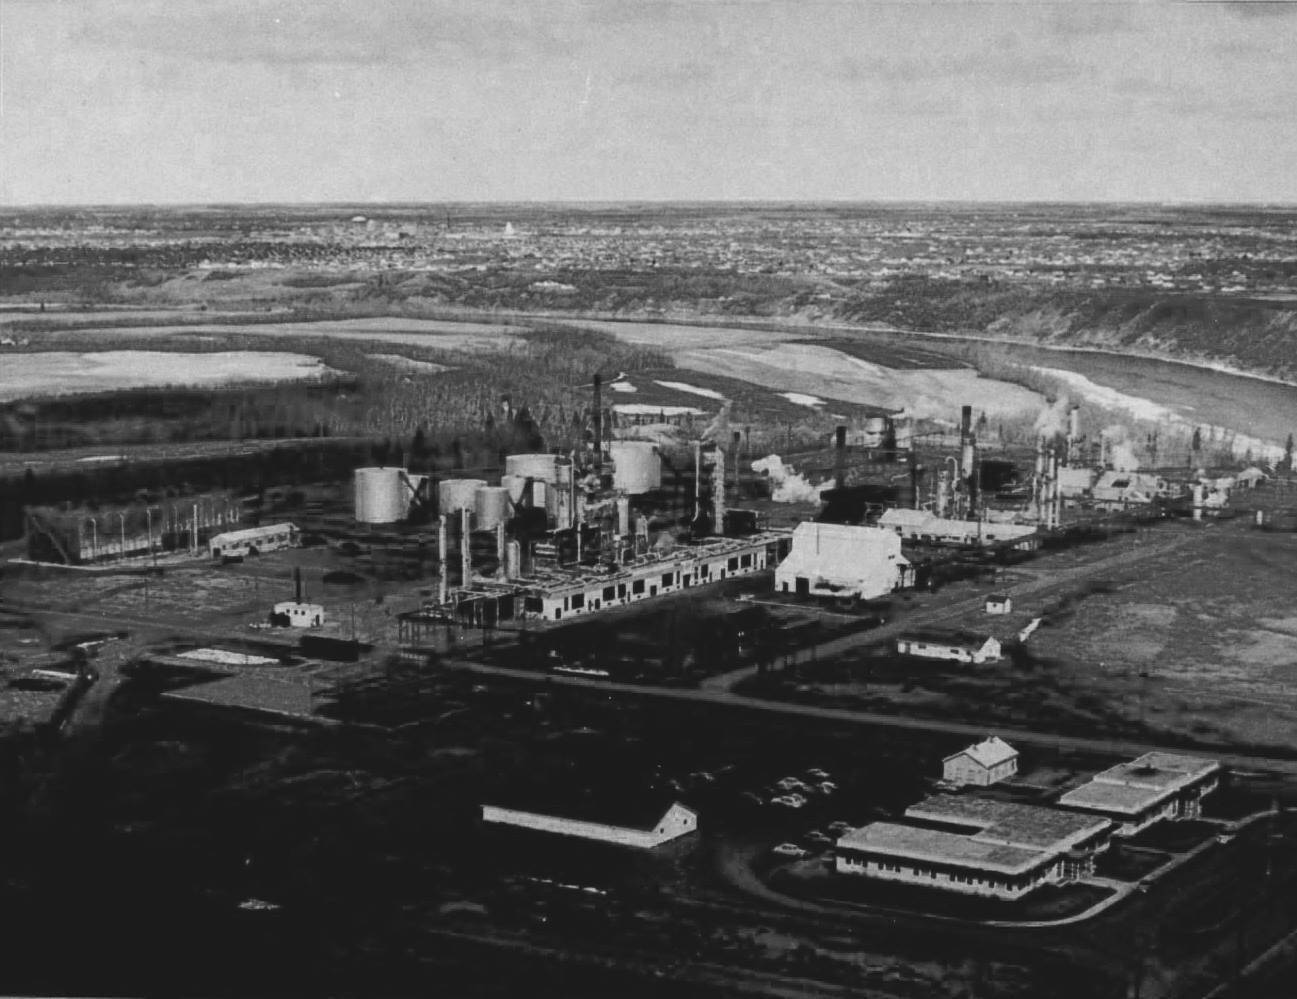 Strathcona refinery: 70 years and counting